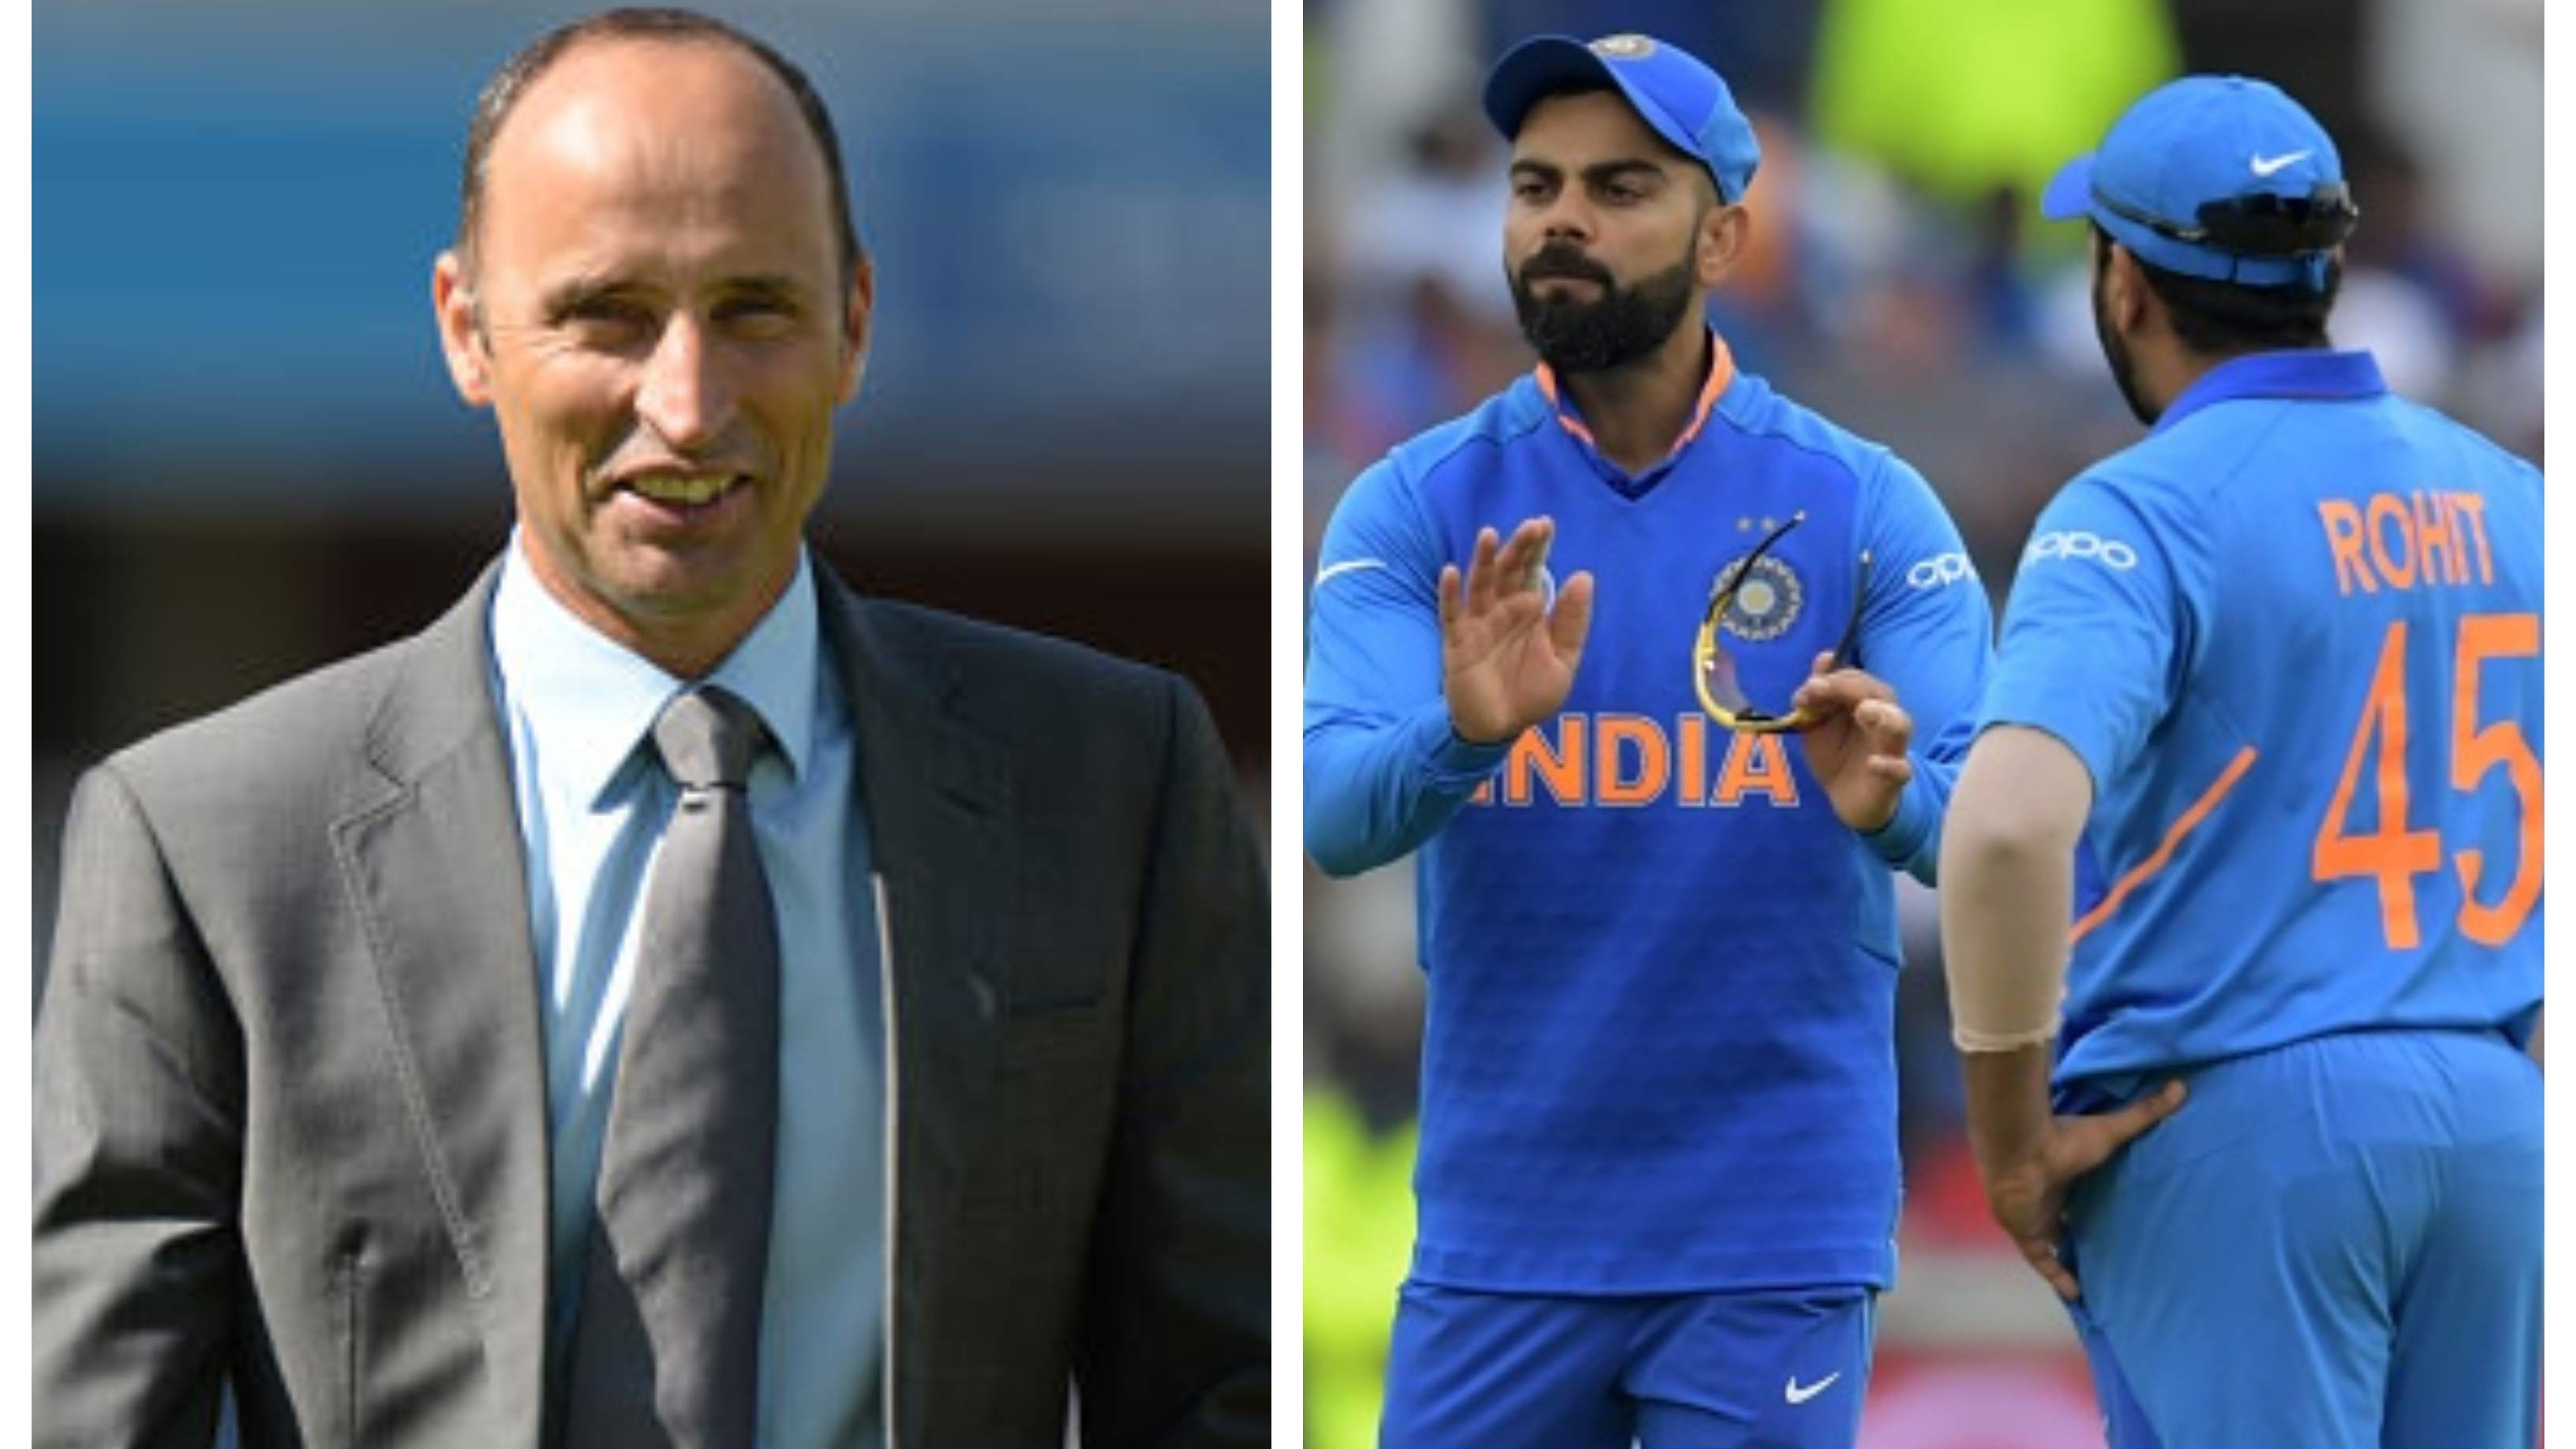 ‘Virat Kohli wouldn't want to hand anything over’ – Nasser Hussain on split captaincy in Indian cricket